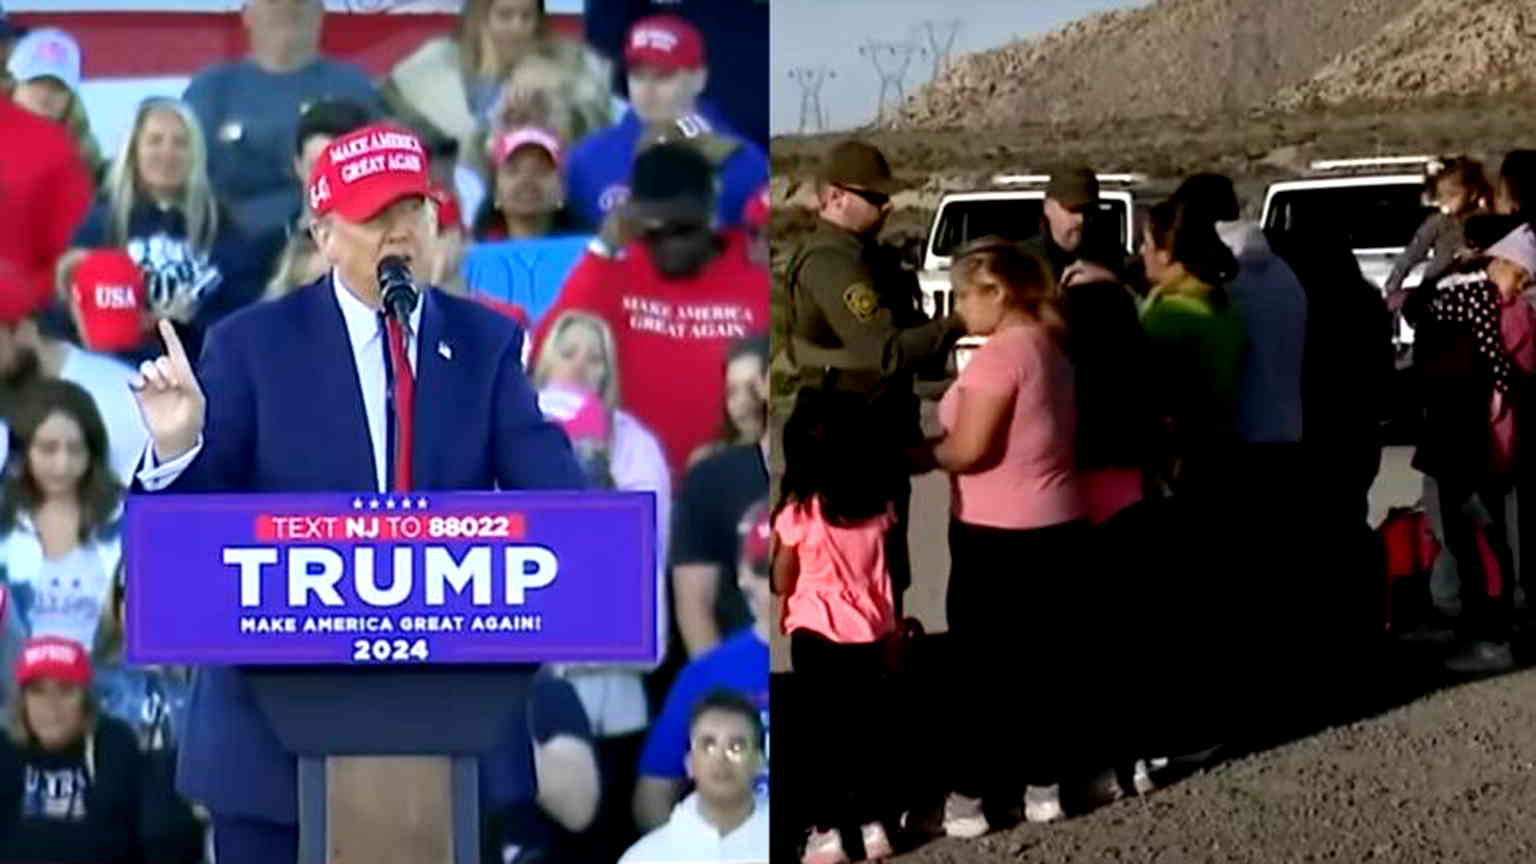 Donald Trump suggests China is ‘building an army’ within the US through Chinese migrants